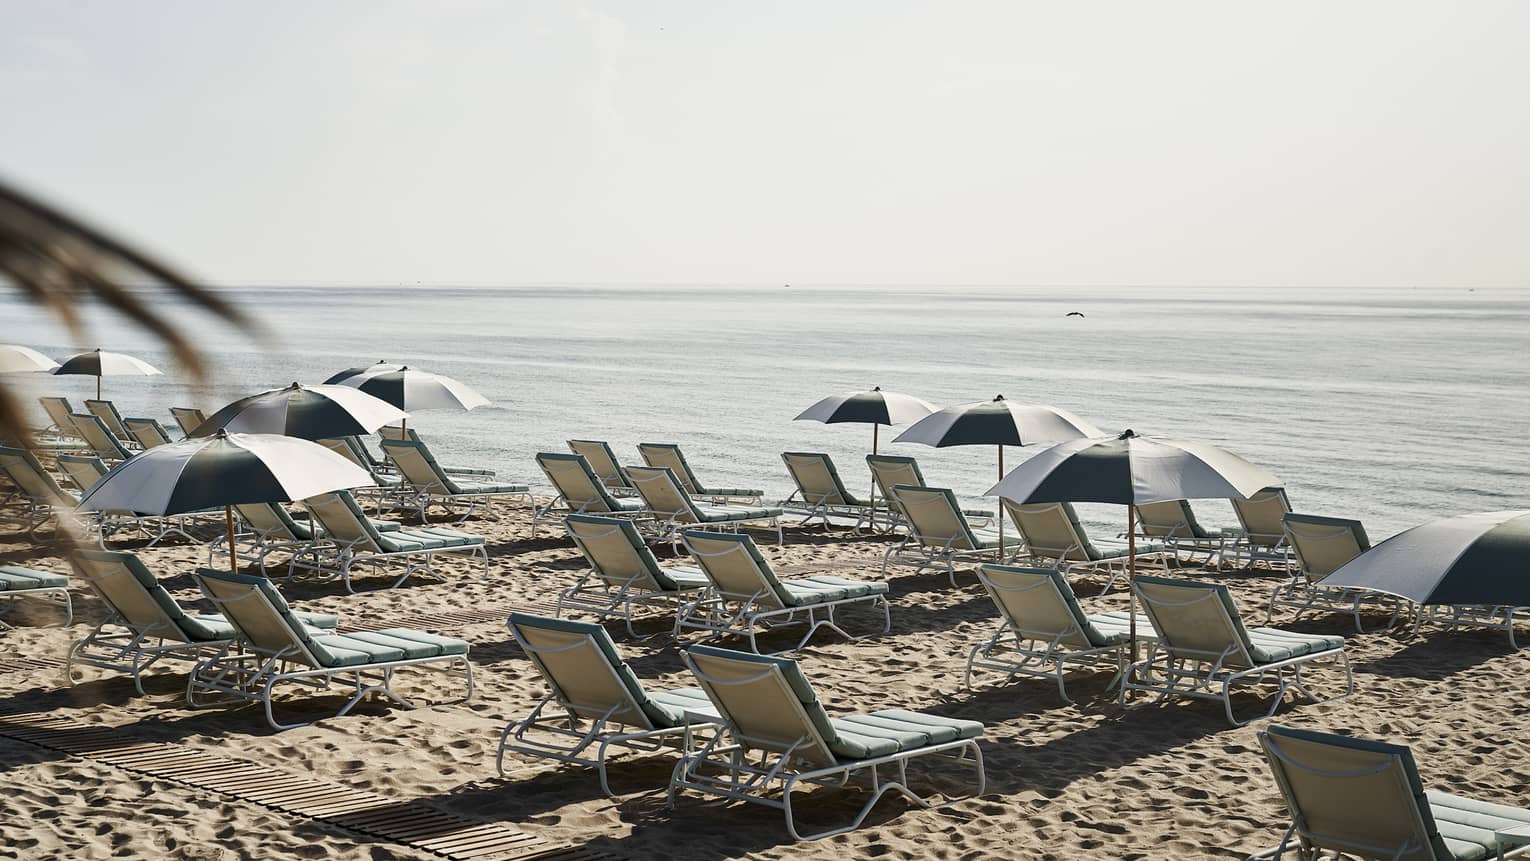 Lounge chairs and umbrellas on a beach.